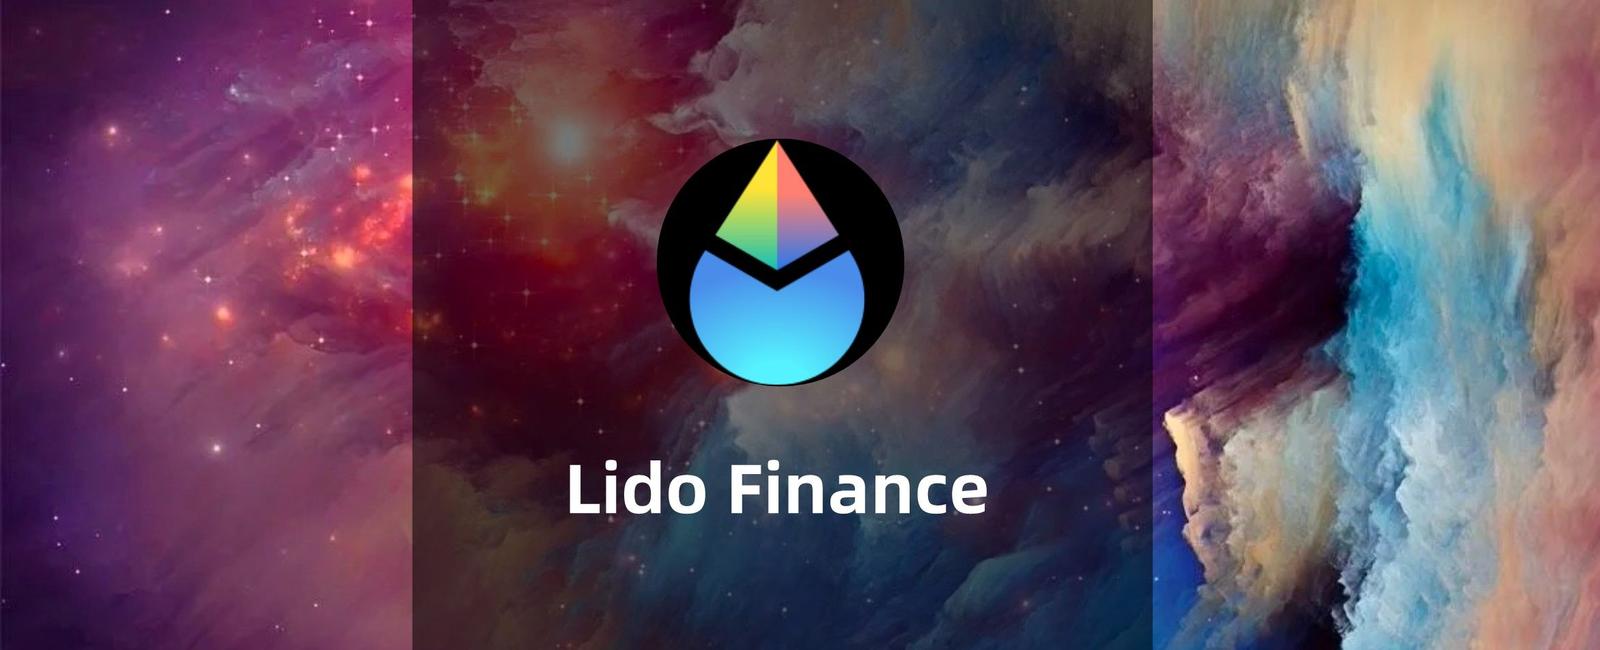 lido finance review lido crypto pros cons features 65b9872a52a53